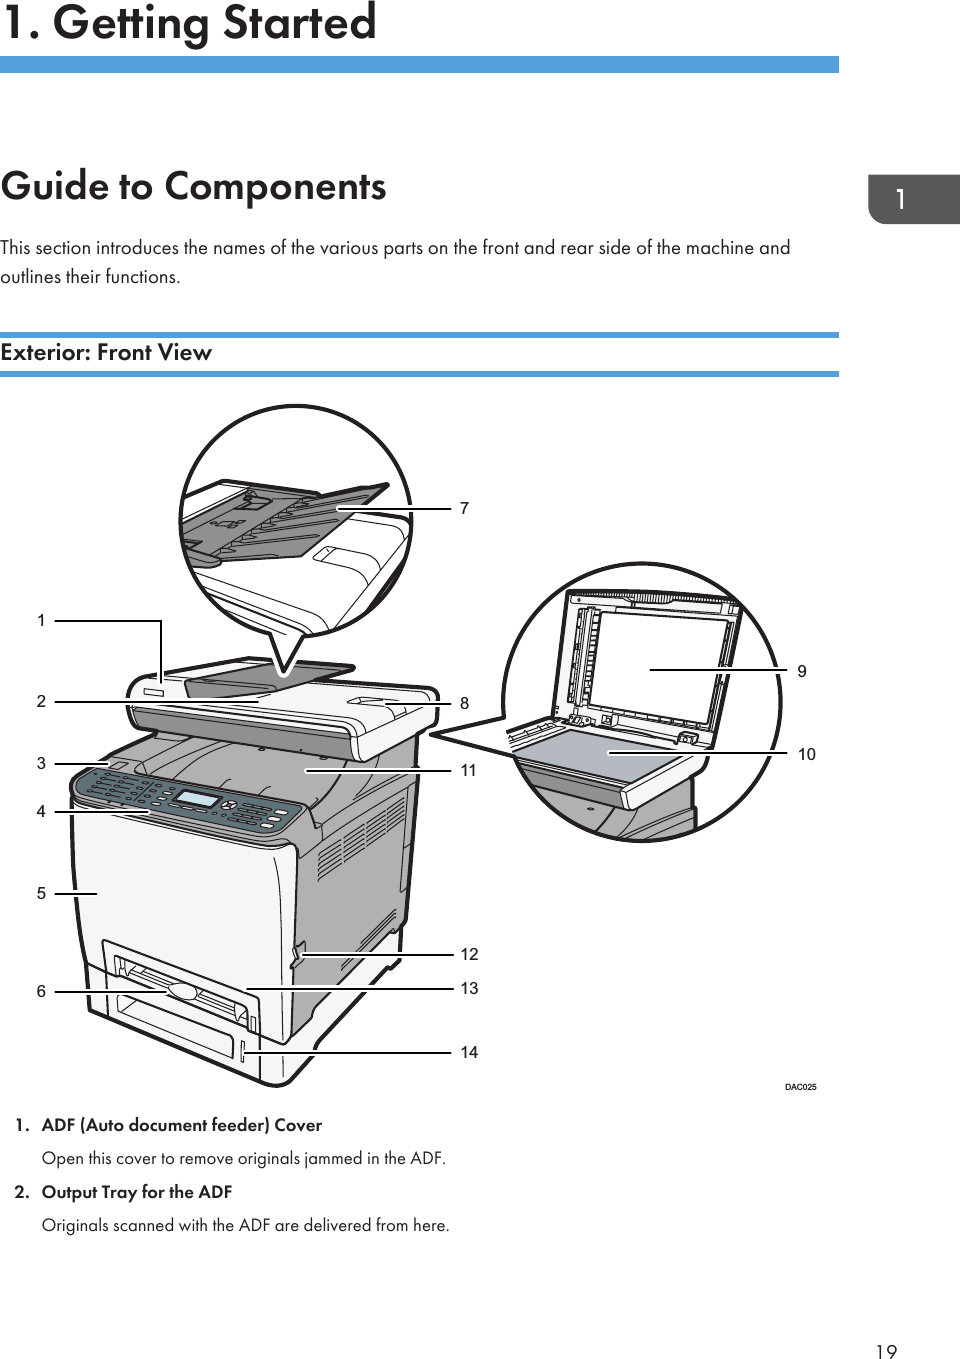 1. Getting StartedGuide to ComponentsThis section introduces the names of the various parts on the front and rear side of the machine andoutlines their functions.Exterior: Front View1234561191014871312DAC0251. ADF (Auto document feeder) CoverOpen this cover to remove originals jammed in the ADF.2. Output Tray for the ADFOriginals scanned with the ADF are delivered from here.19